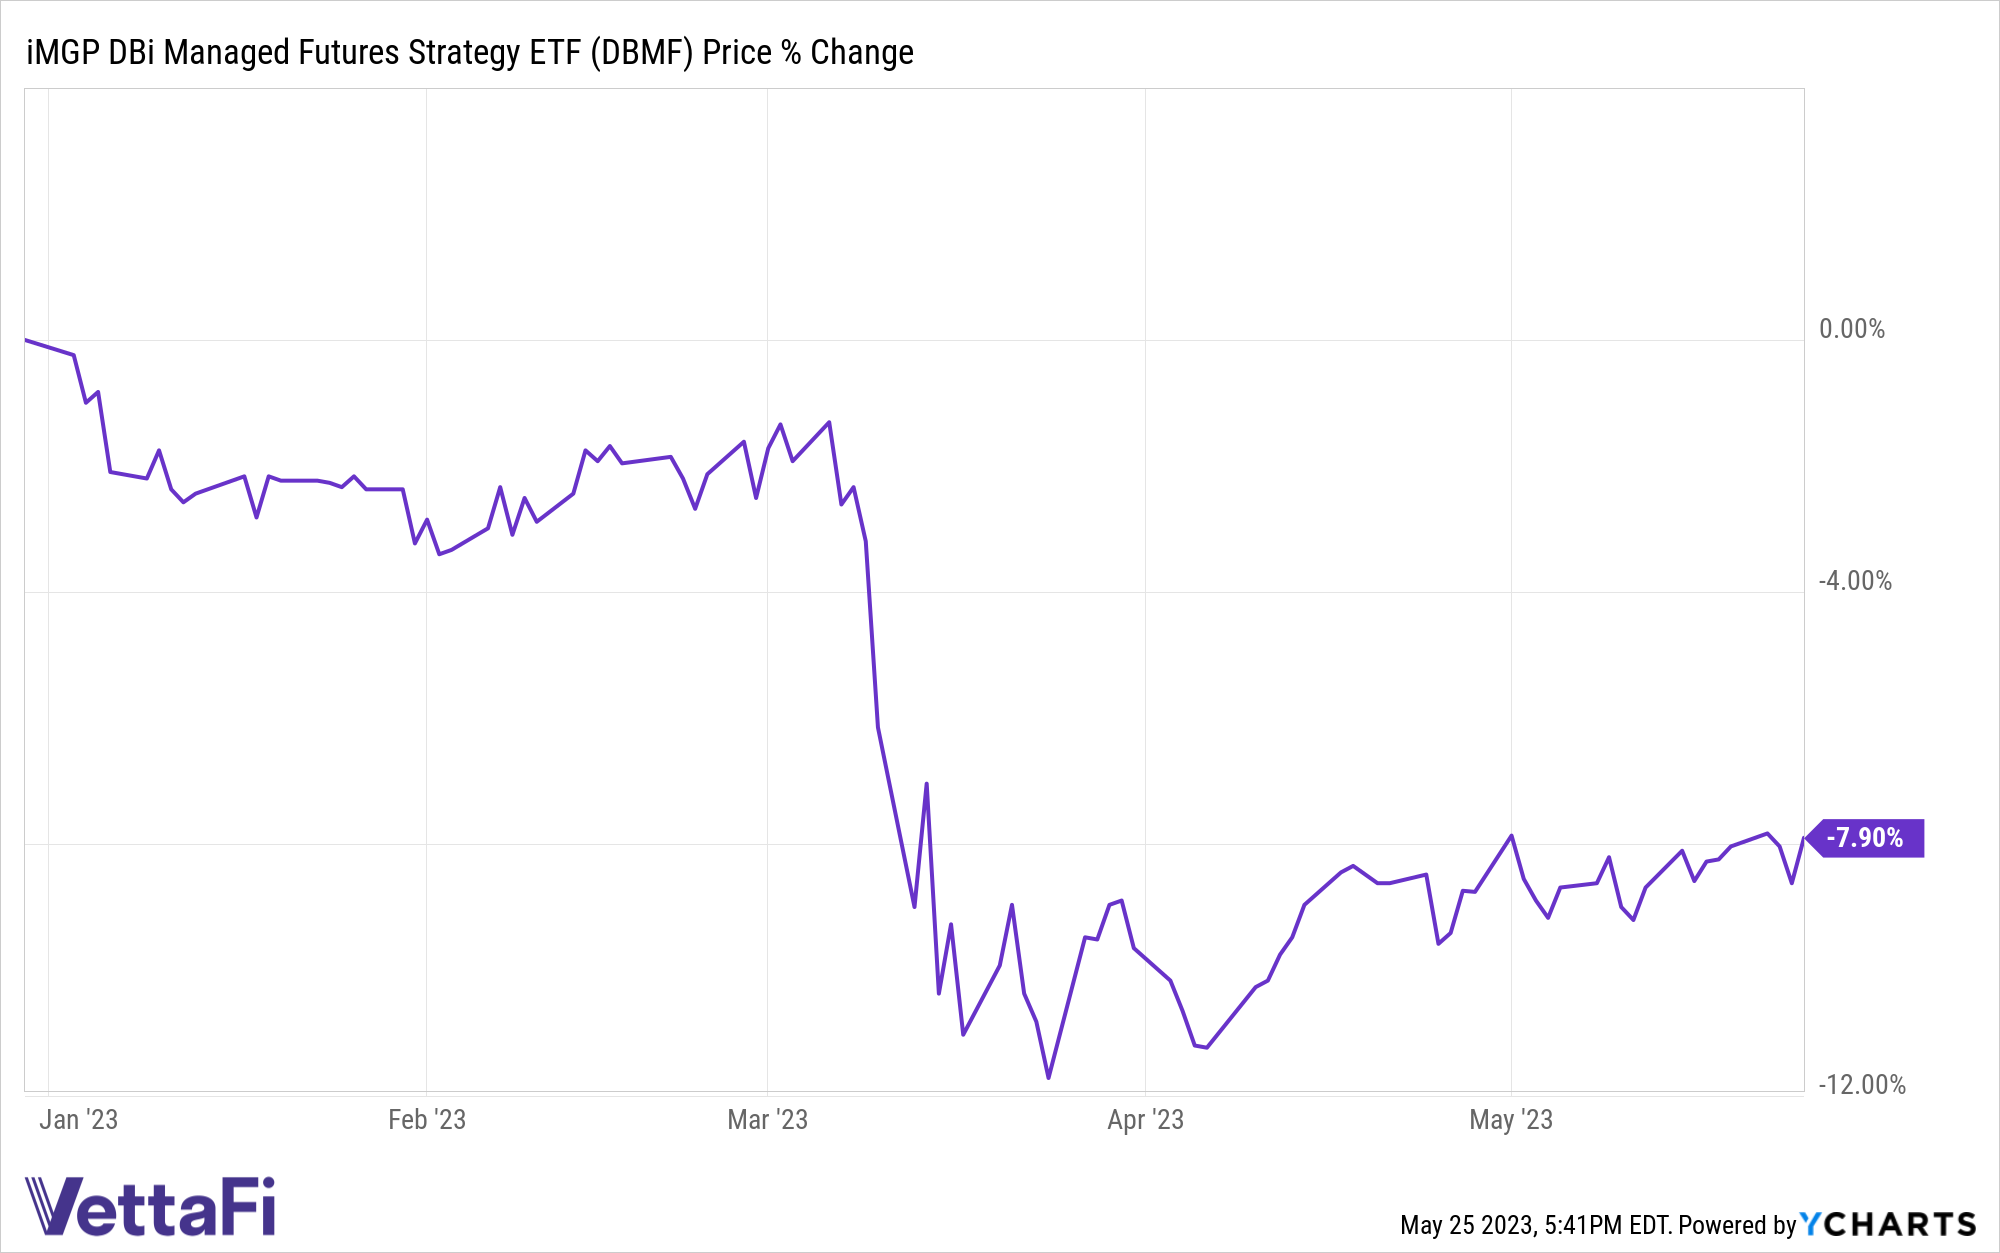 Chart of DBMF's price performance YTD. Volatility since mid-March reflects lack of emerging trends, which should resolve by the second half